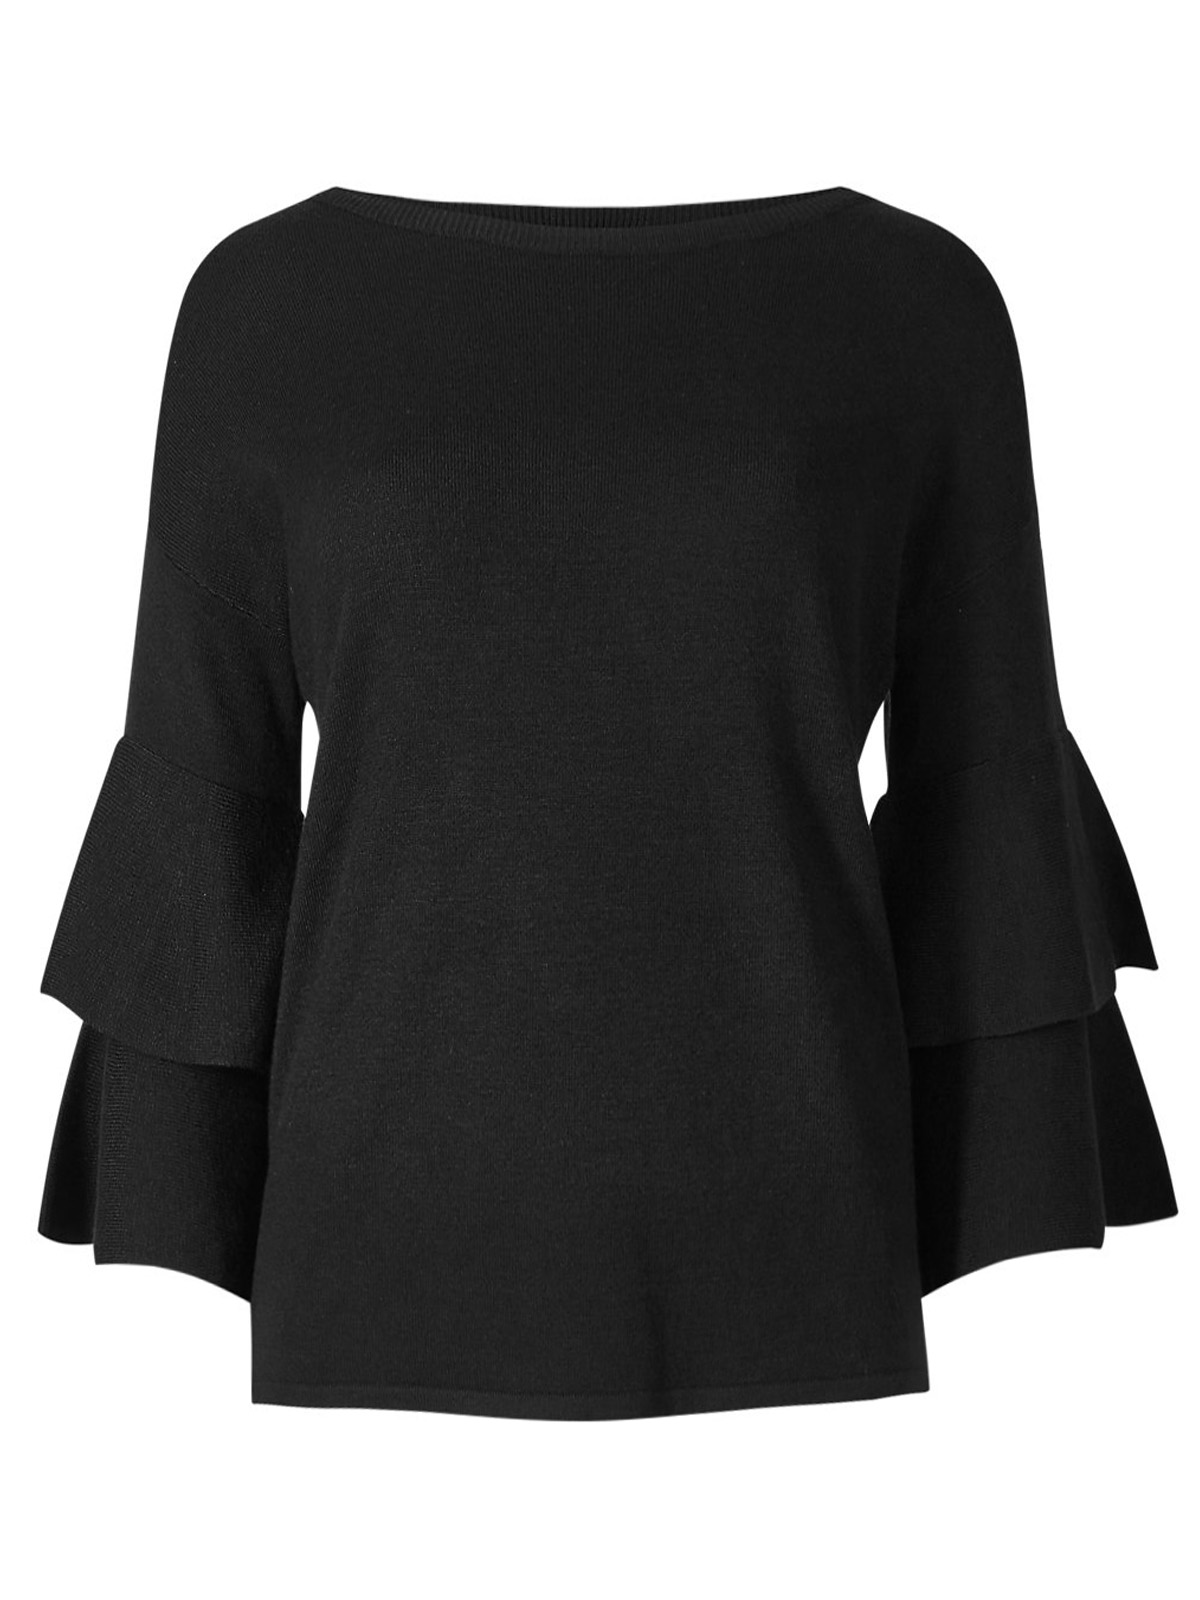 Marks and Spencer - - M&5 BLACK Tiered Sleeve Fine Knit Jumper - Size 6 ...